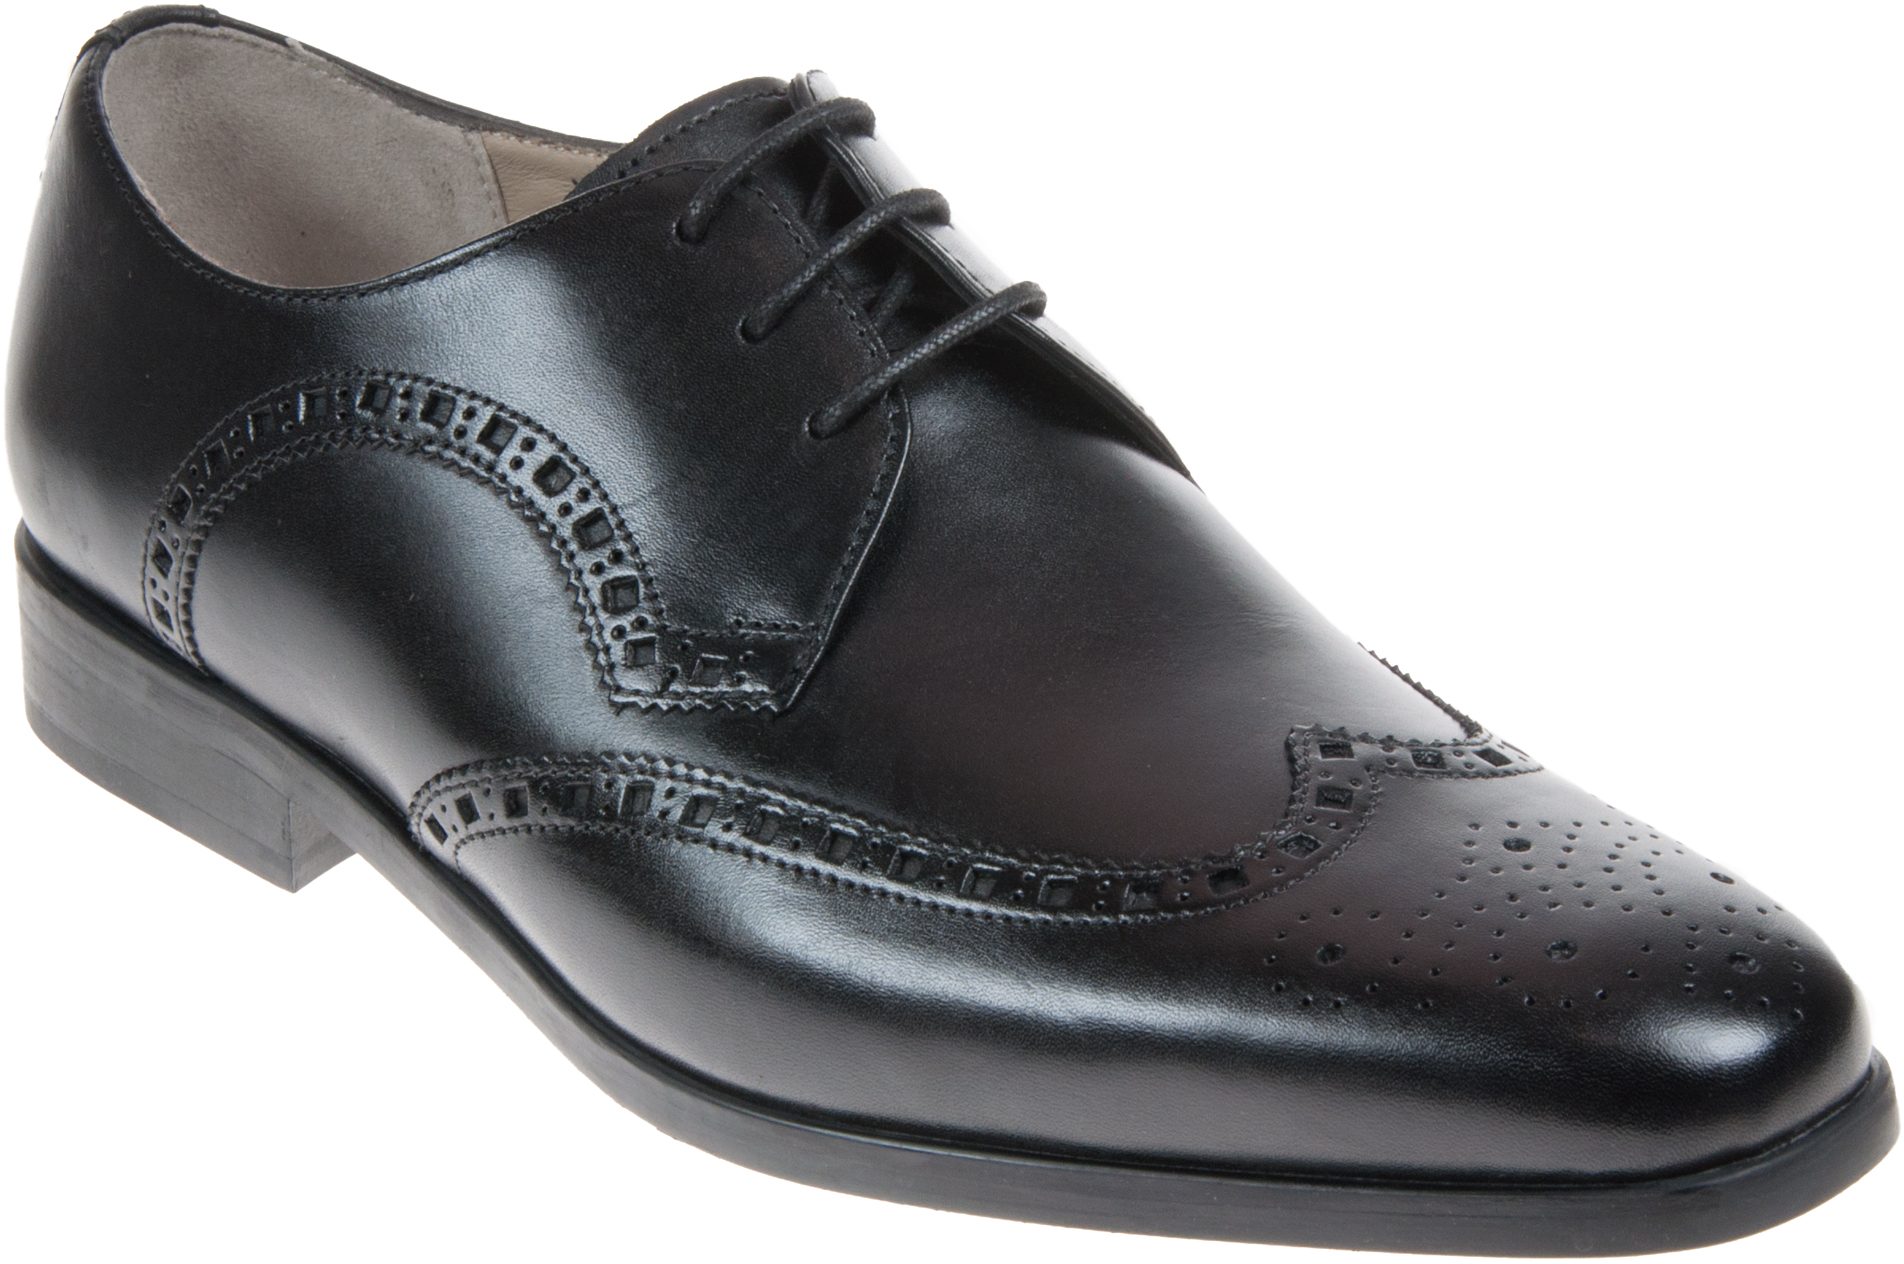 Clarks Amieson Limit Black Leather 26115282 - Formal Shoes - Humphries ...